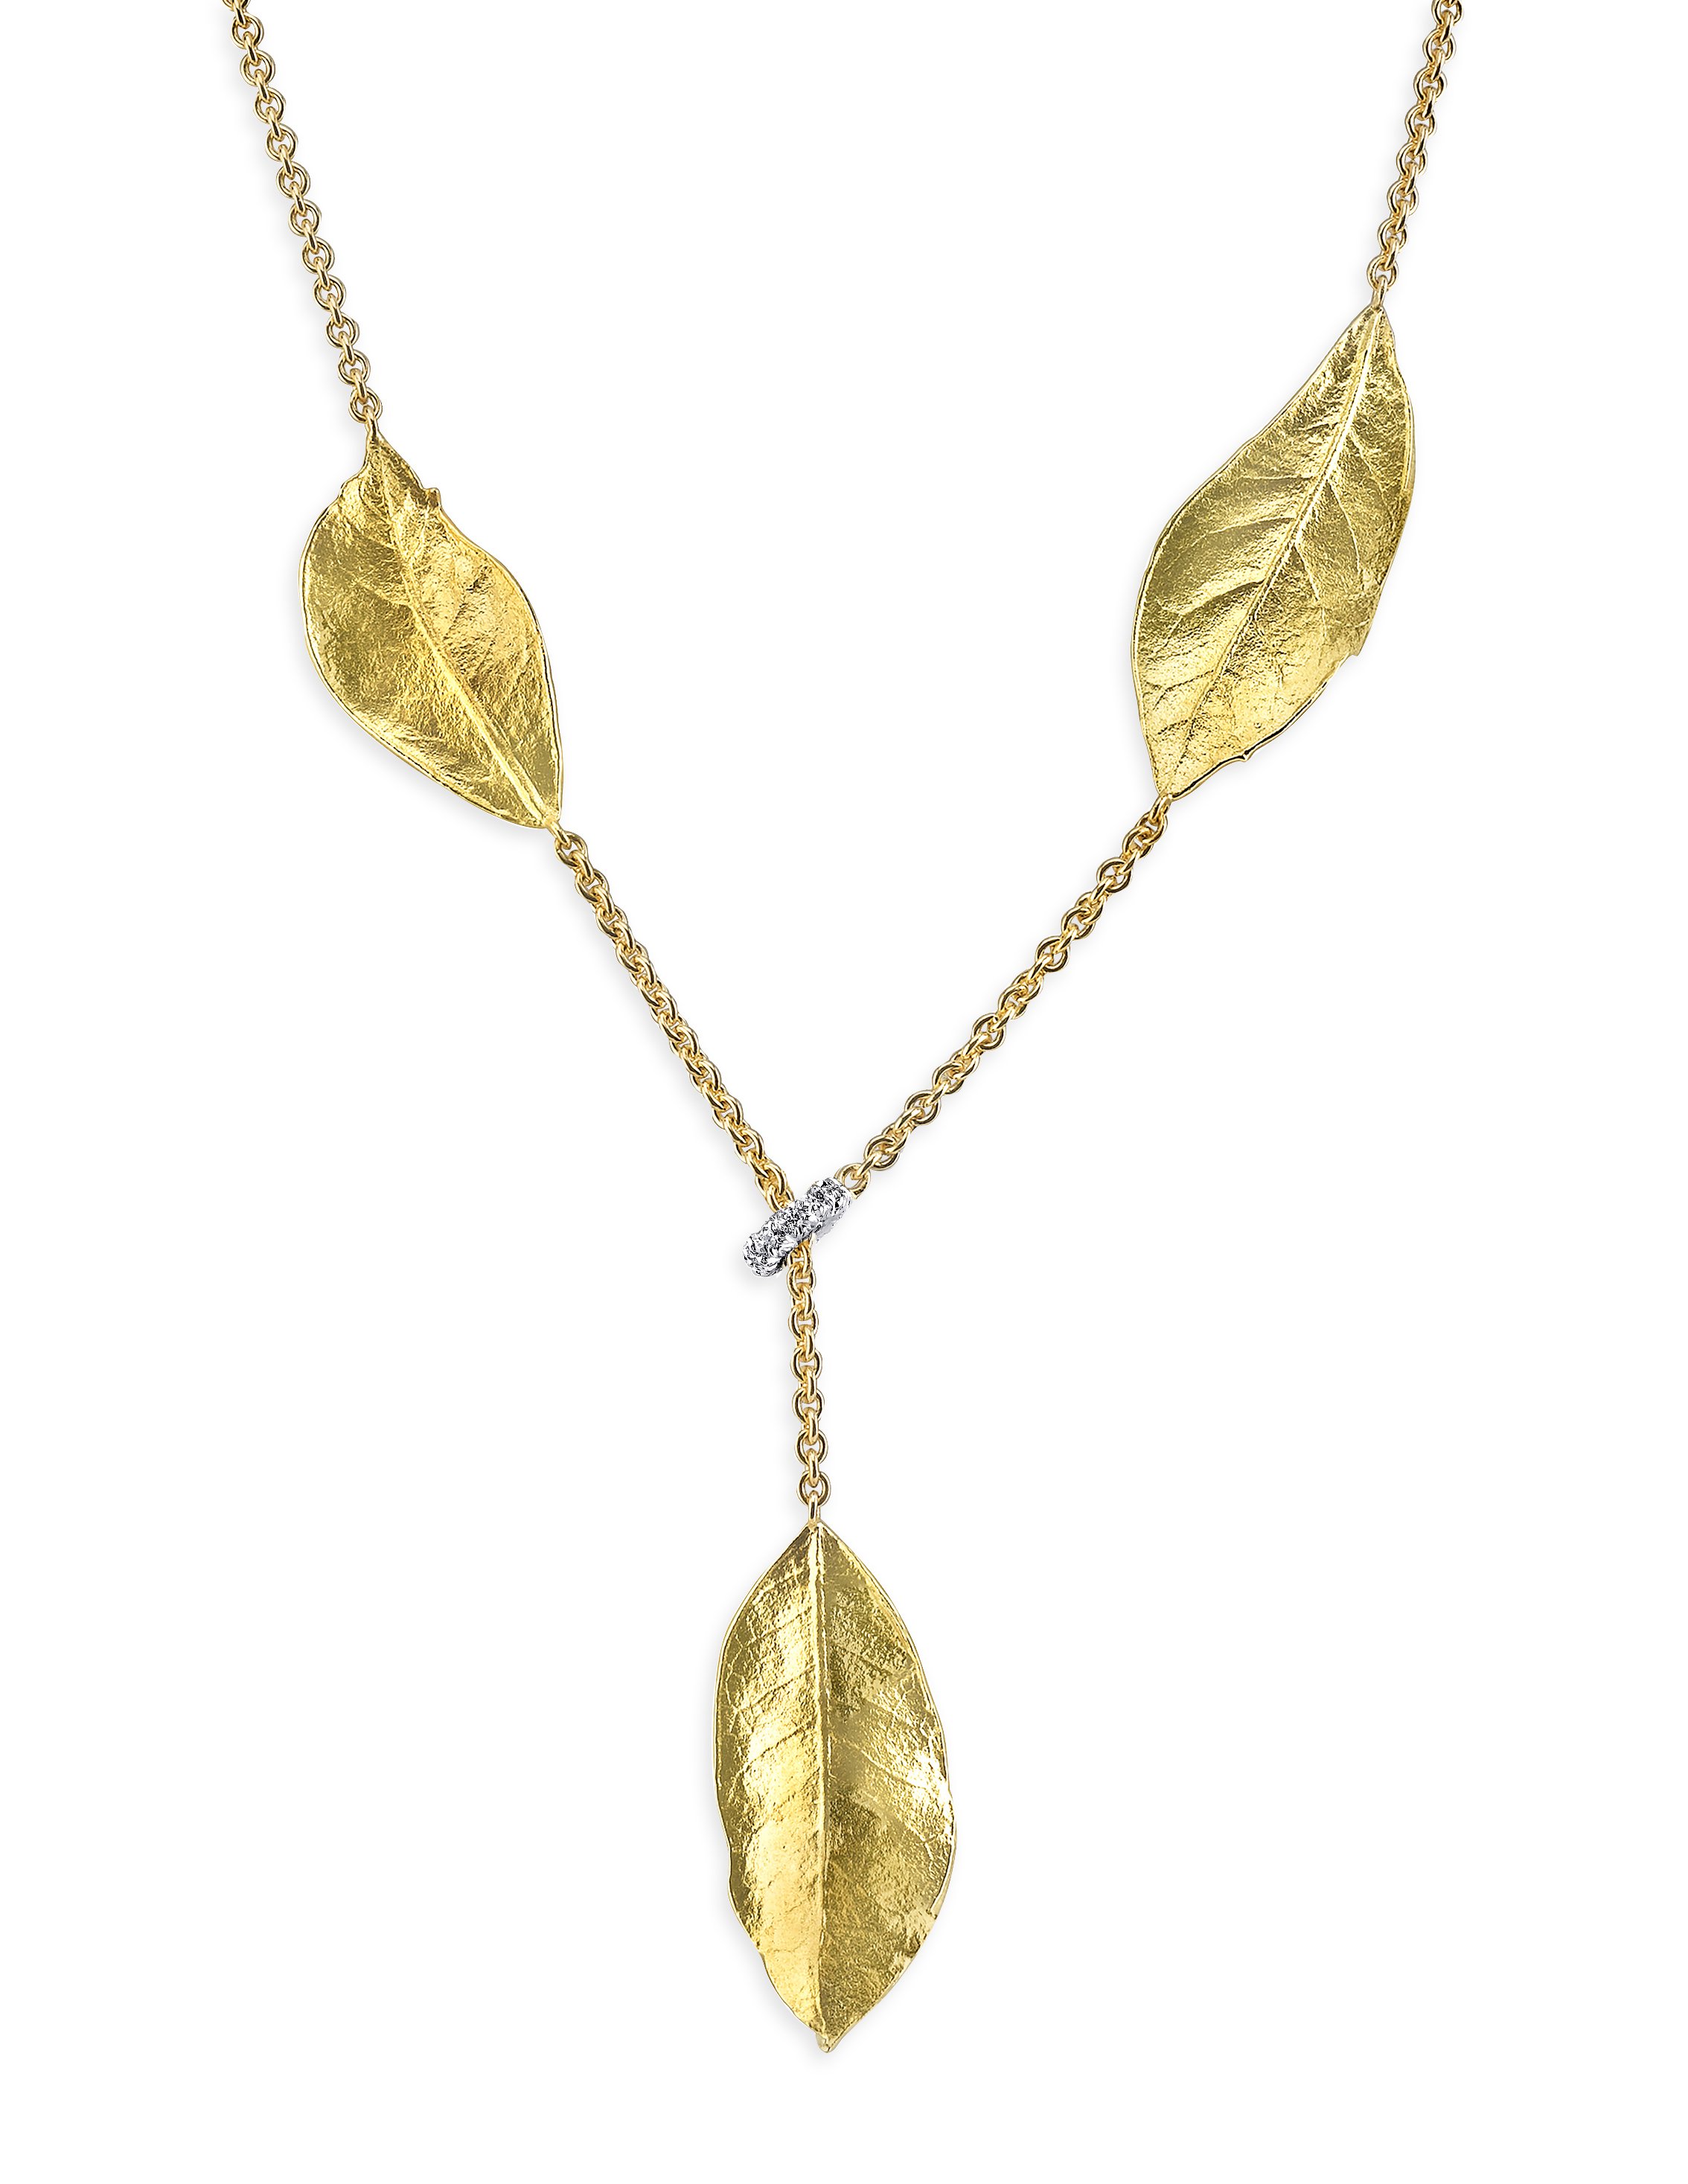 3 Southern Oak Leaf and Chain Lariat Necklace with Diamonds in 19kt Yellow Gold